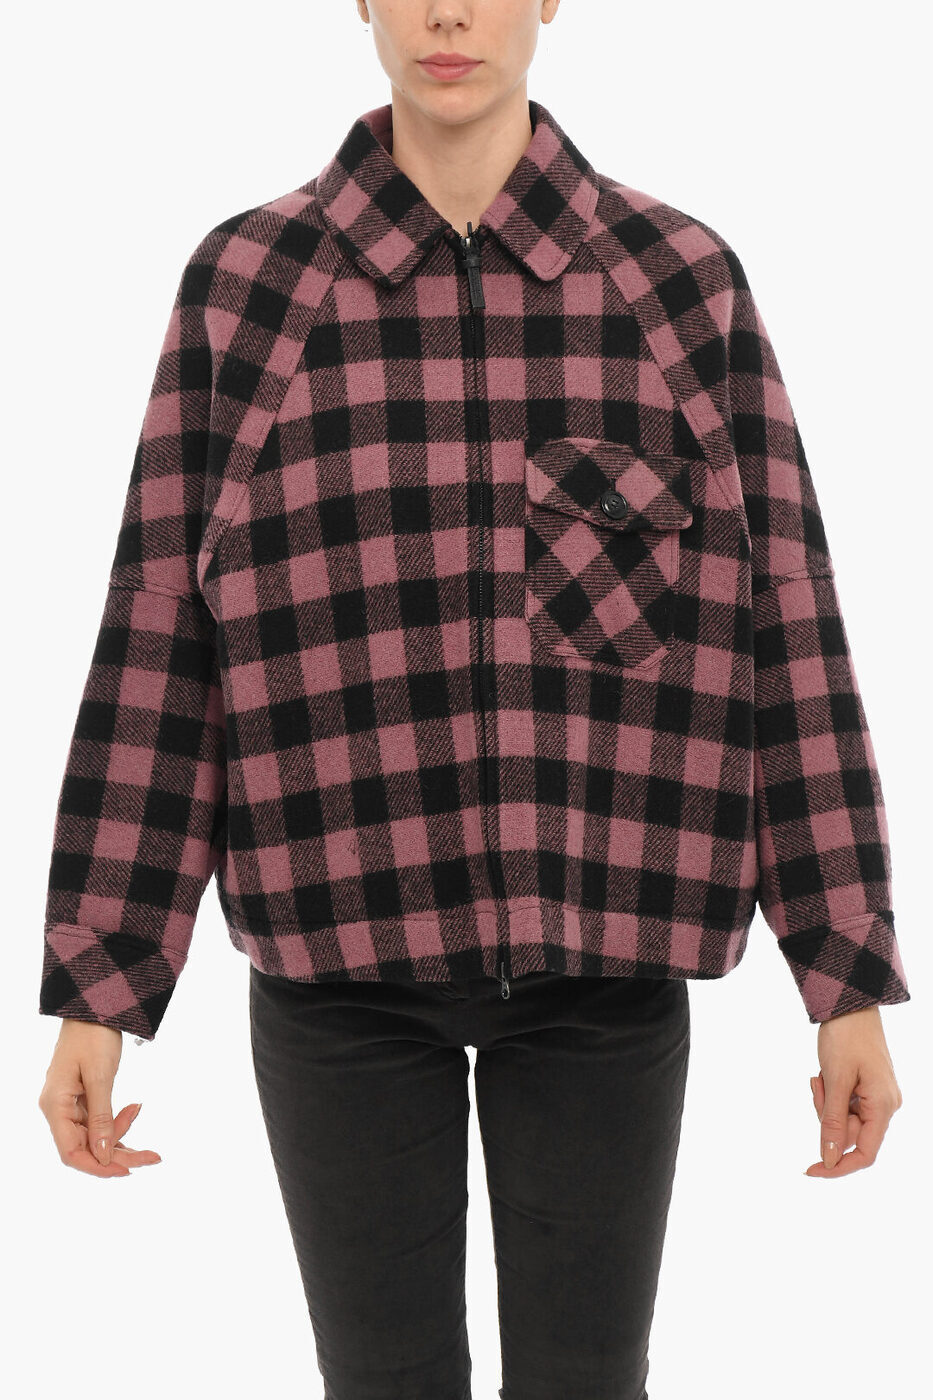 WOOLRICH ウールリッチ ジャケット COWRCPS0029 463 レディース TWO-TONE BUFFALO CHECKED JACKET WITH ZIP CLOSURE AND BREAST 【関税・送料無料】【ラッピング無料】 dk